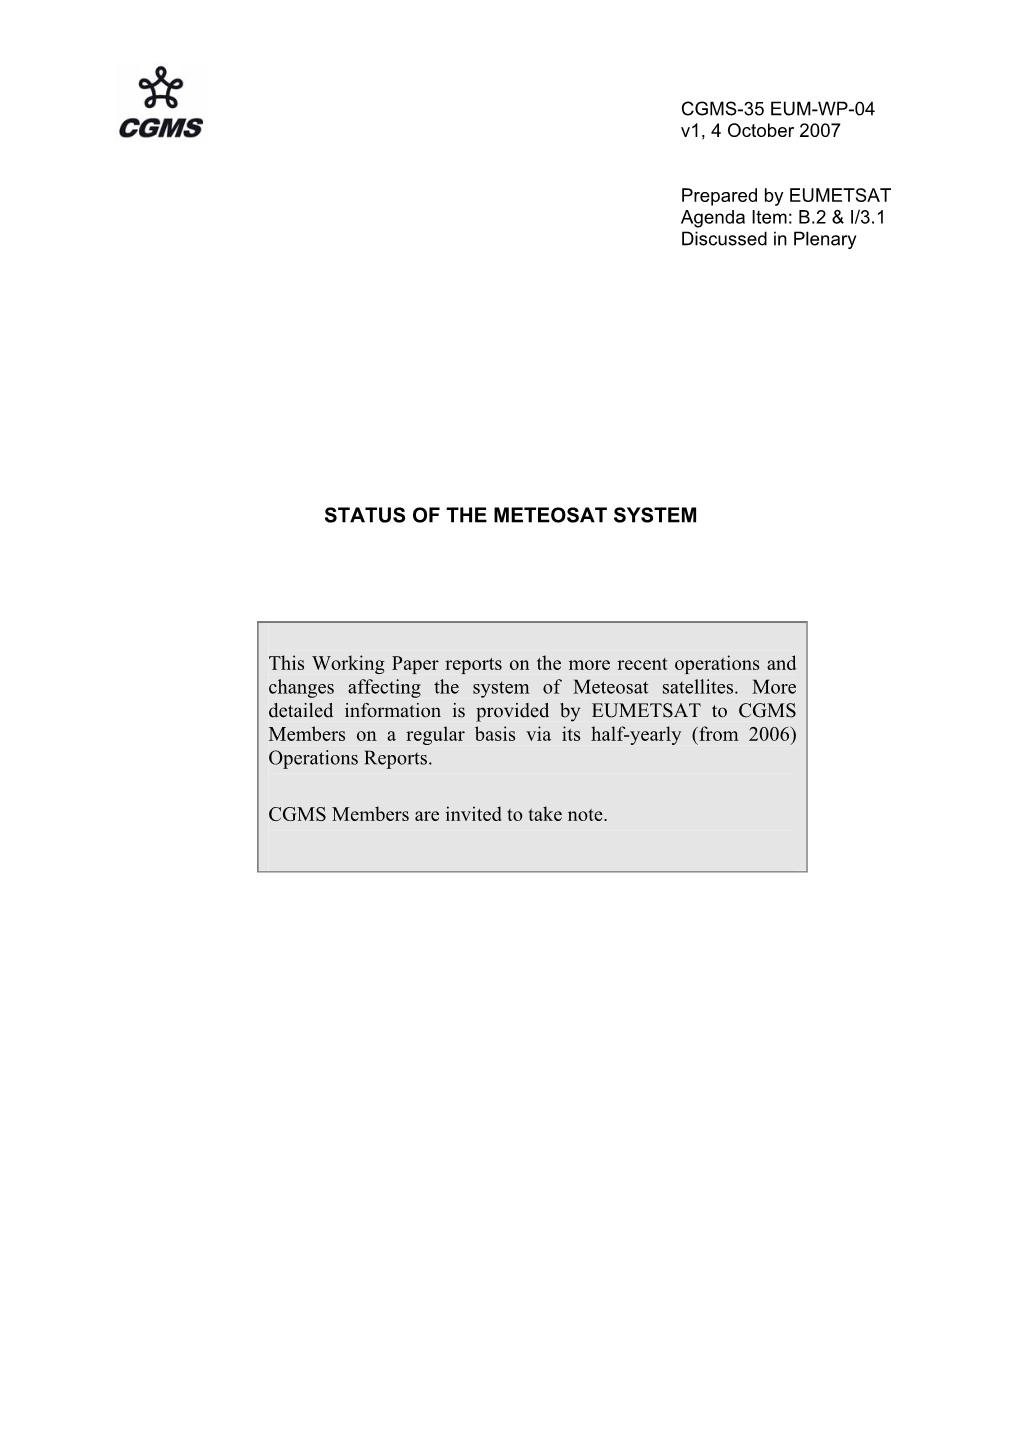 STATUS of the METEOSAT SYSTEM This Working Paper Reports